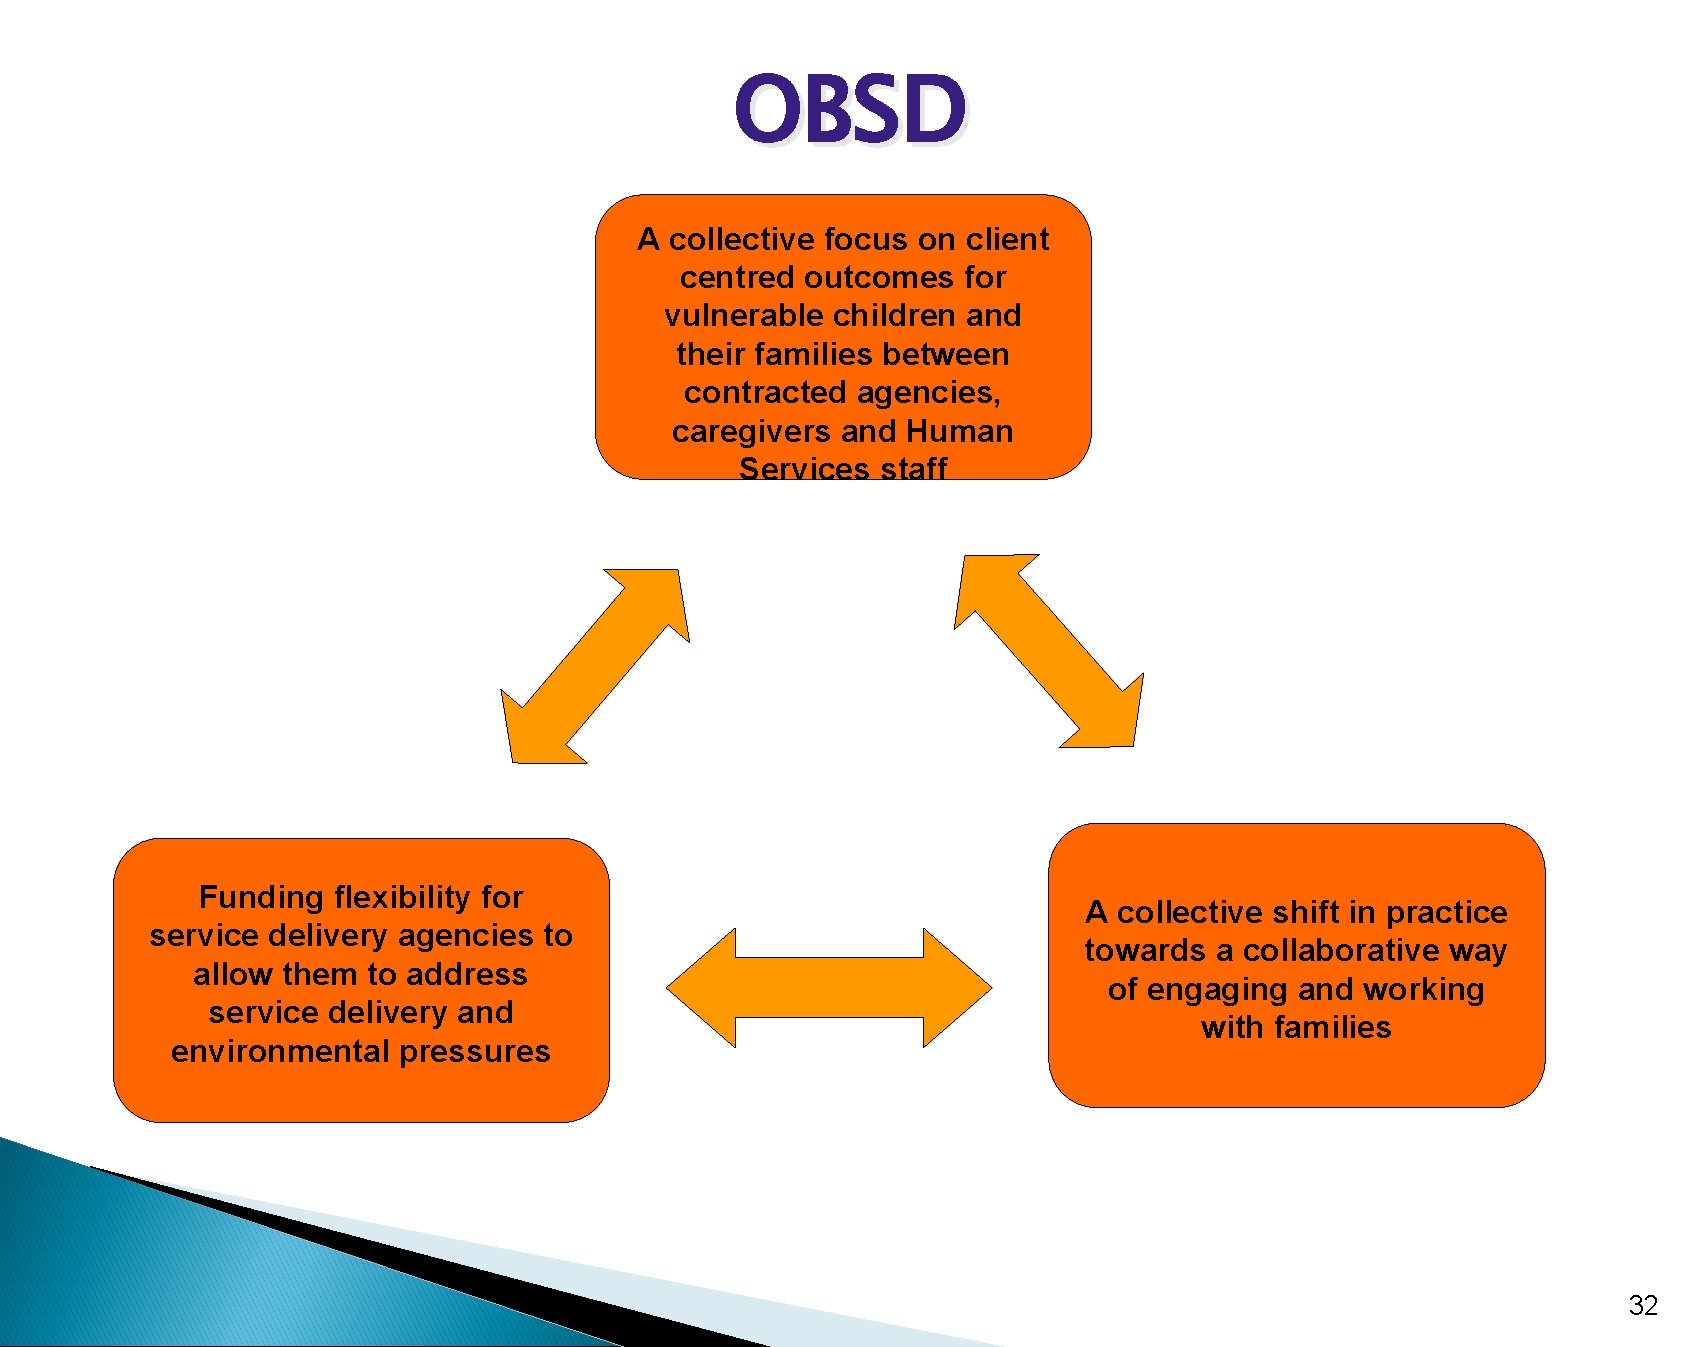 OBSD A collective focus on client centred outcomes for vulnerable children and their families